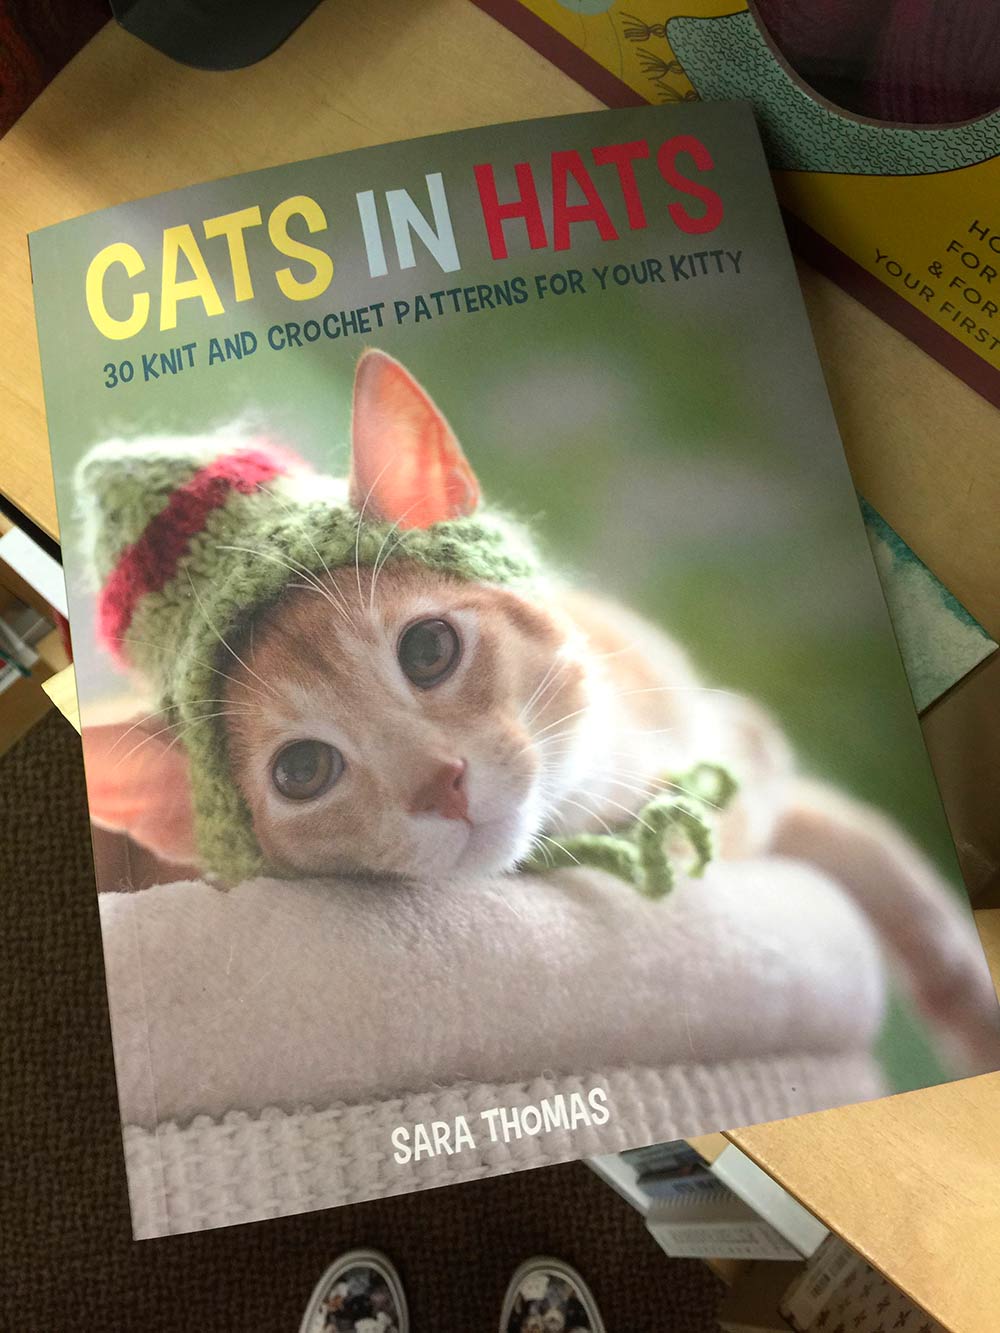 cats-in-hats